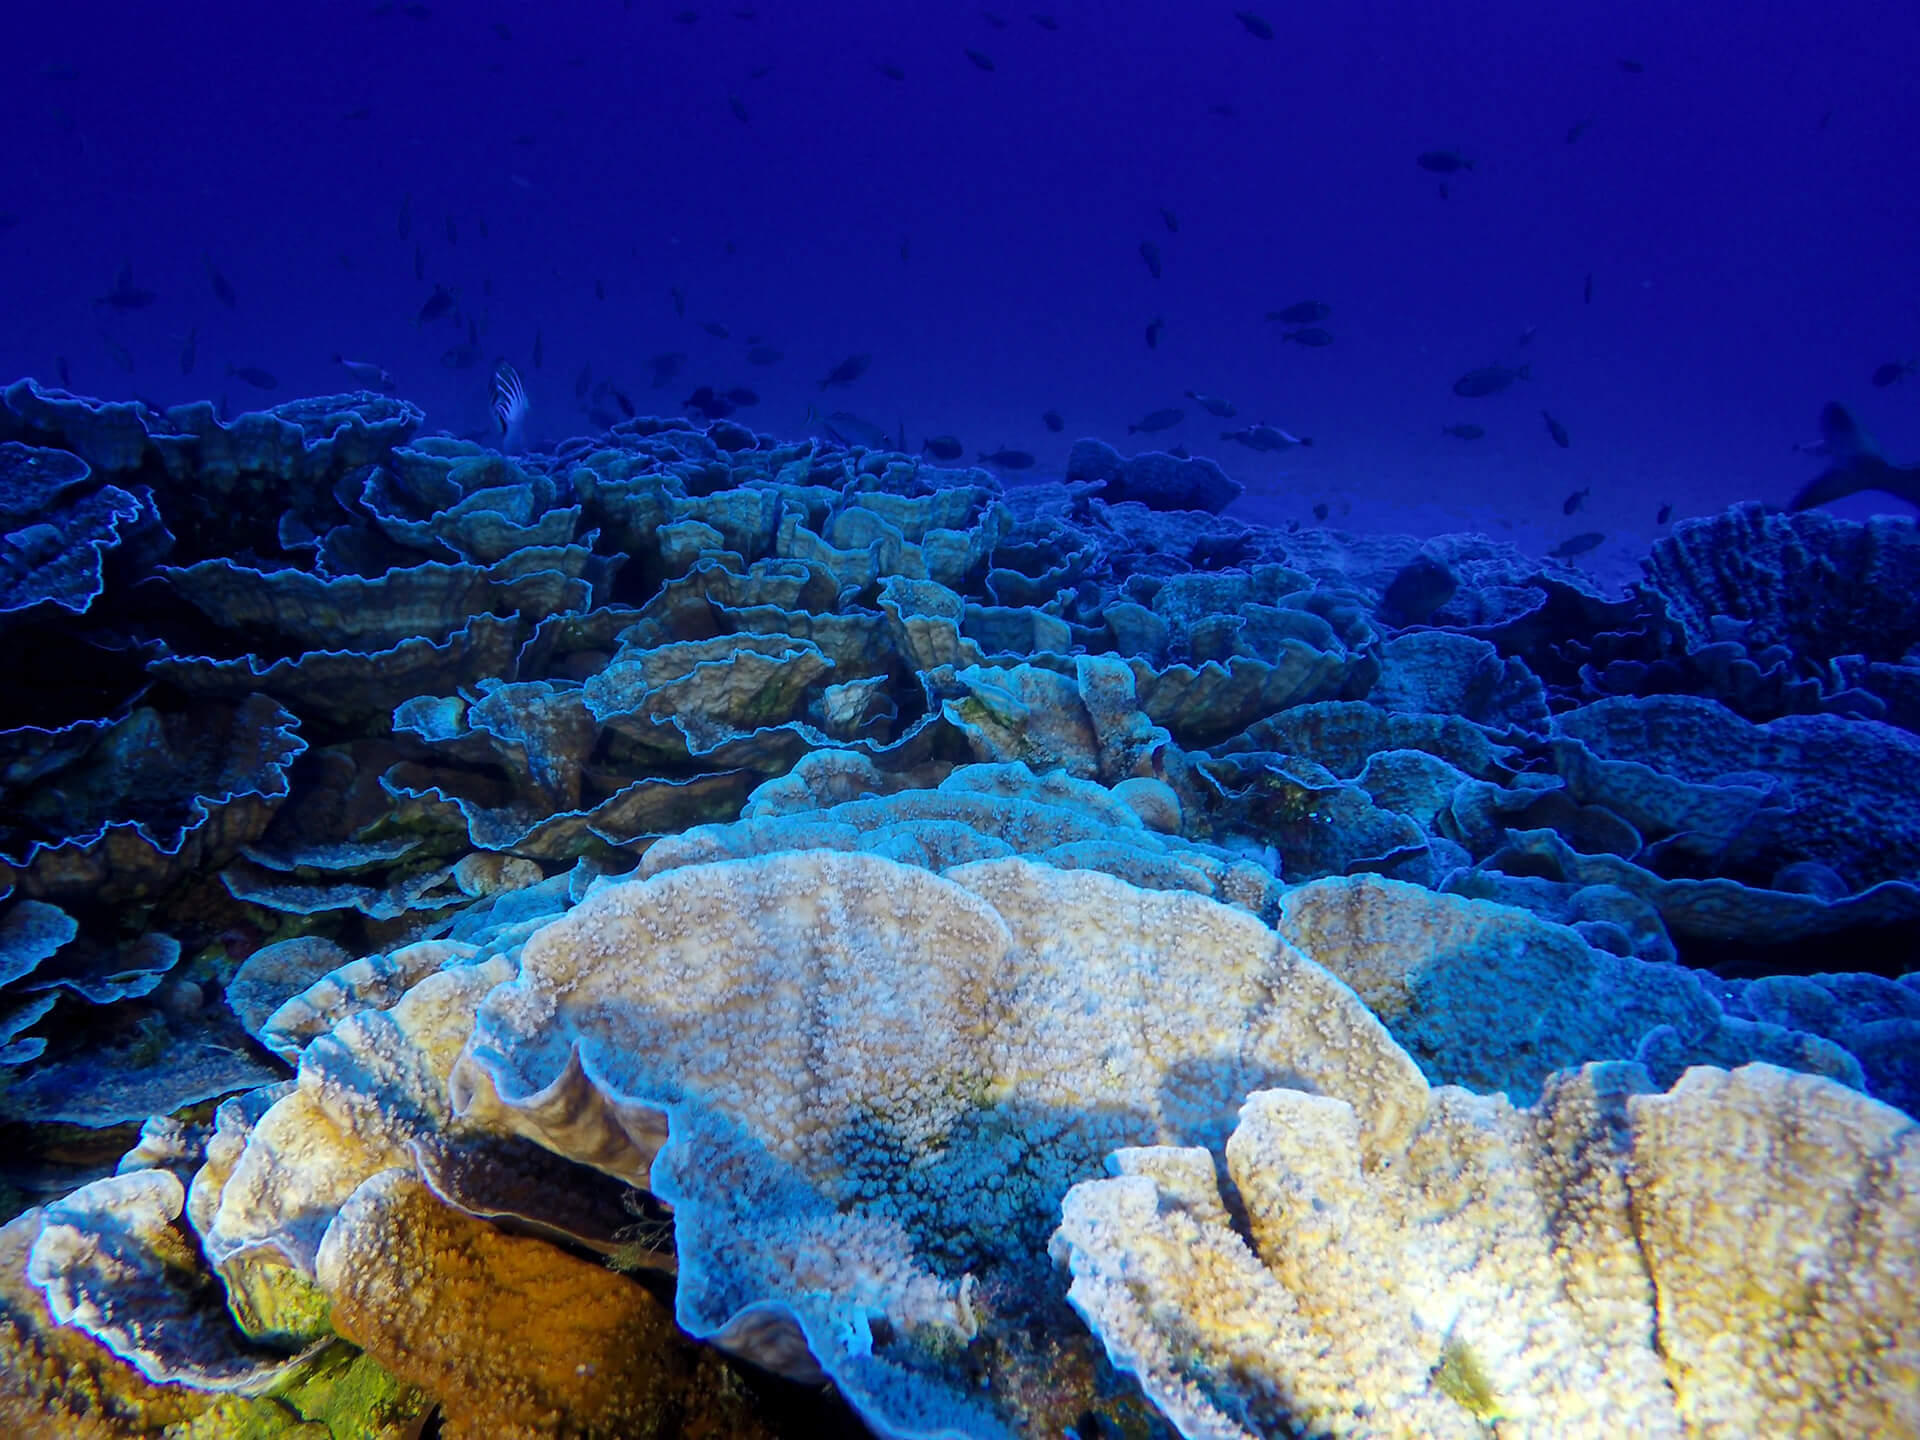 <p>The Anakena reef, in the marine protected area of Rapa Nui, about 80 metres below the sea surface. (Image © Matthias Gorny/ Oceana &amp; ESMOI)</p>